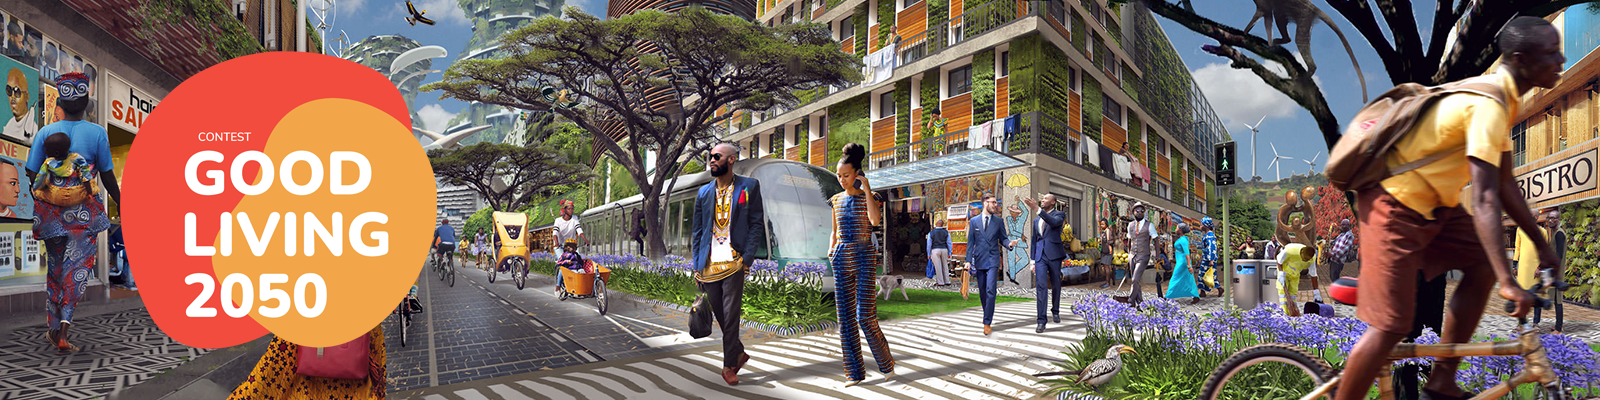 Good Living 2050 logo on digital render of a green, urban environment with black and brown people commuting